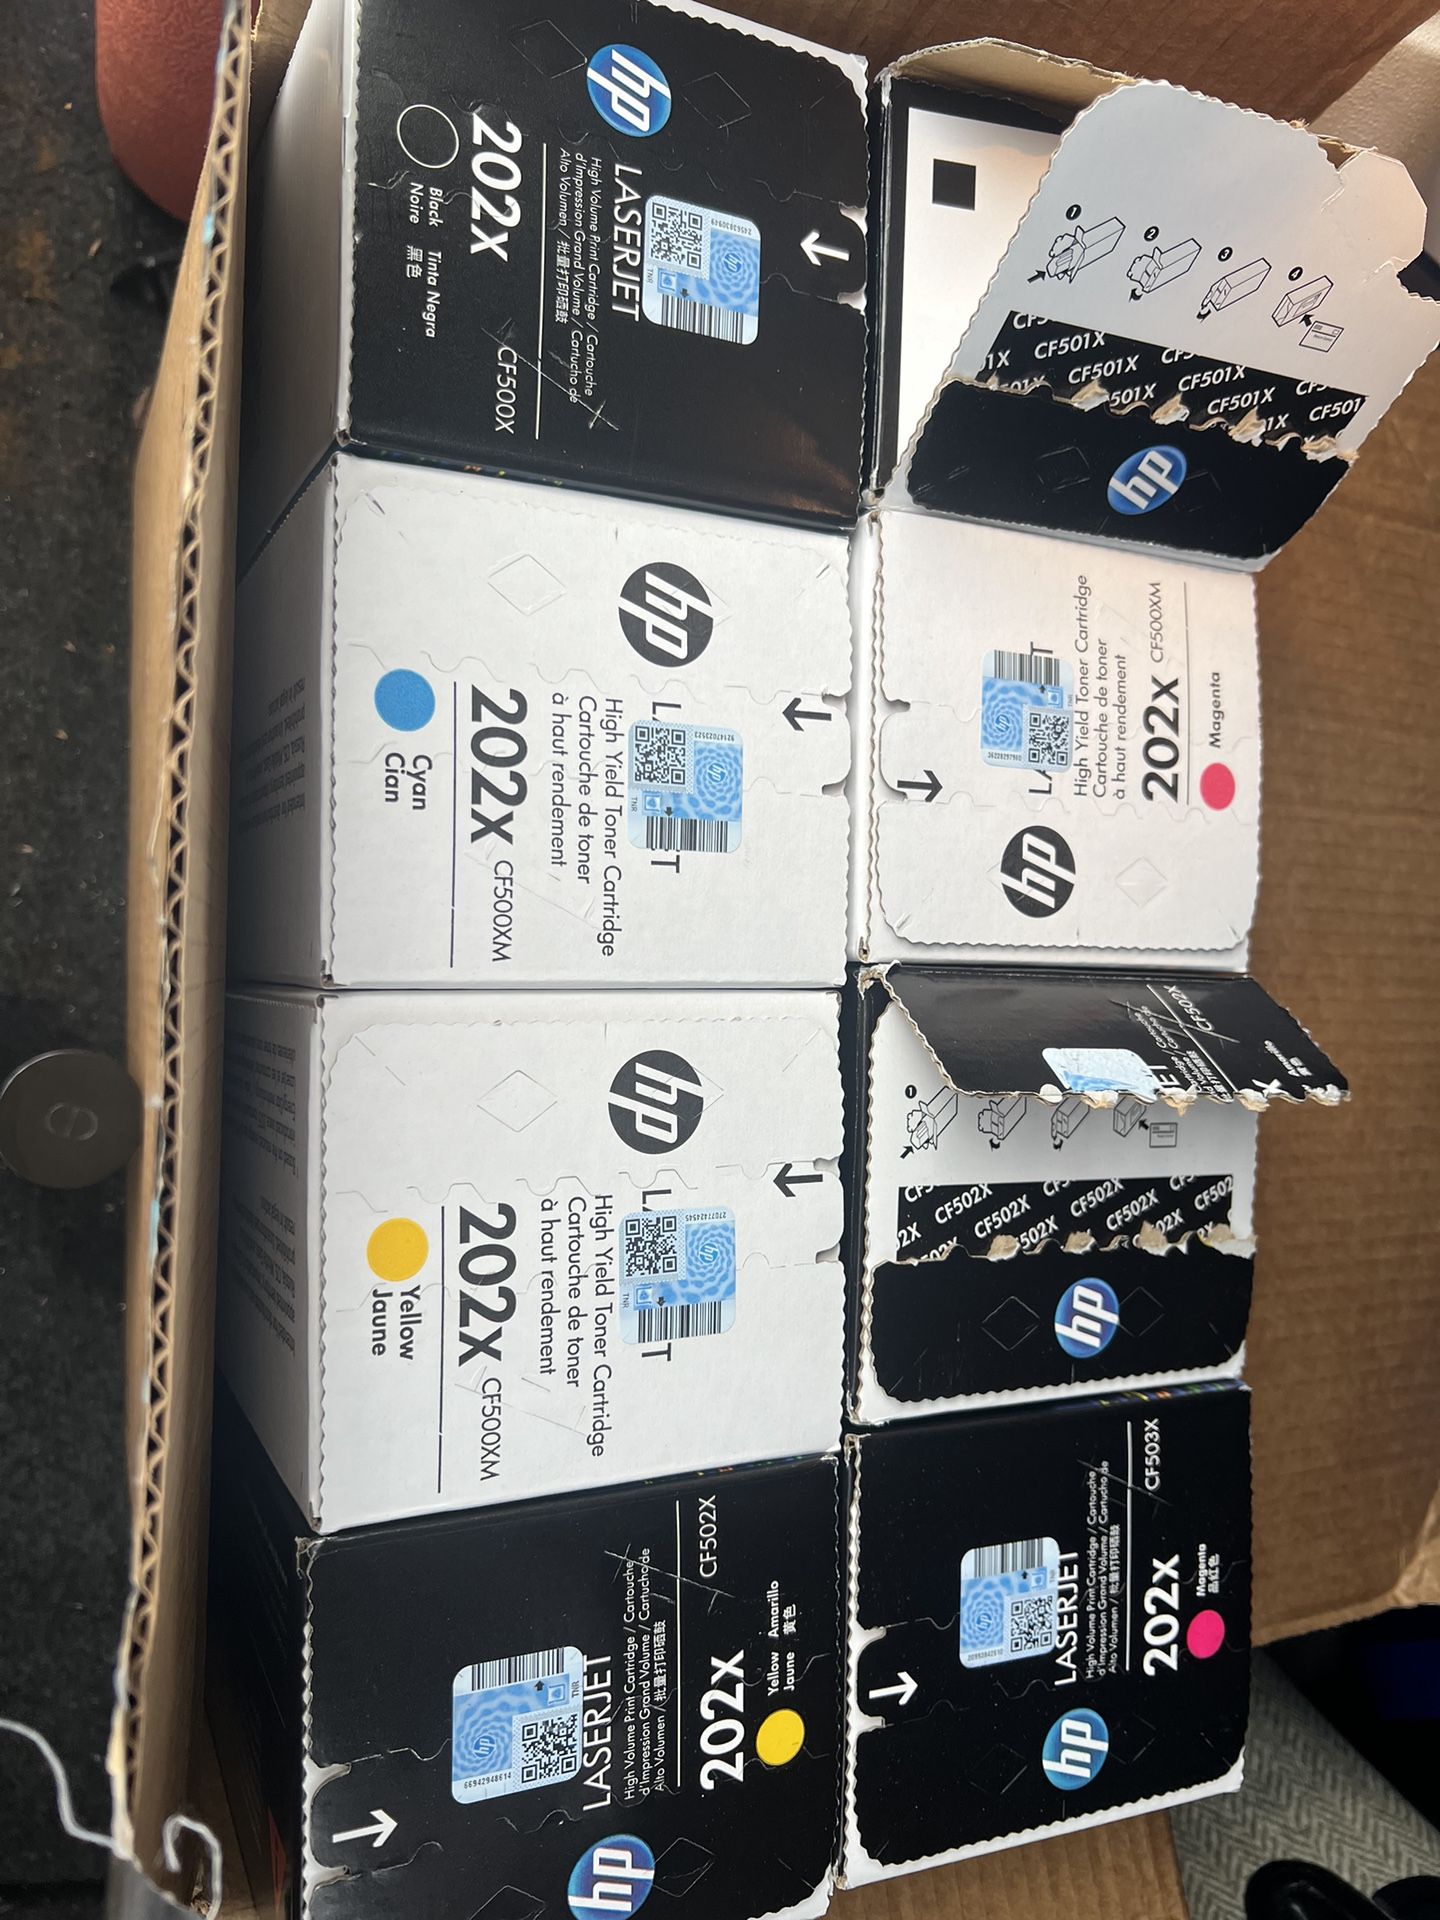 Ink Cartridges For A Printer